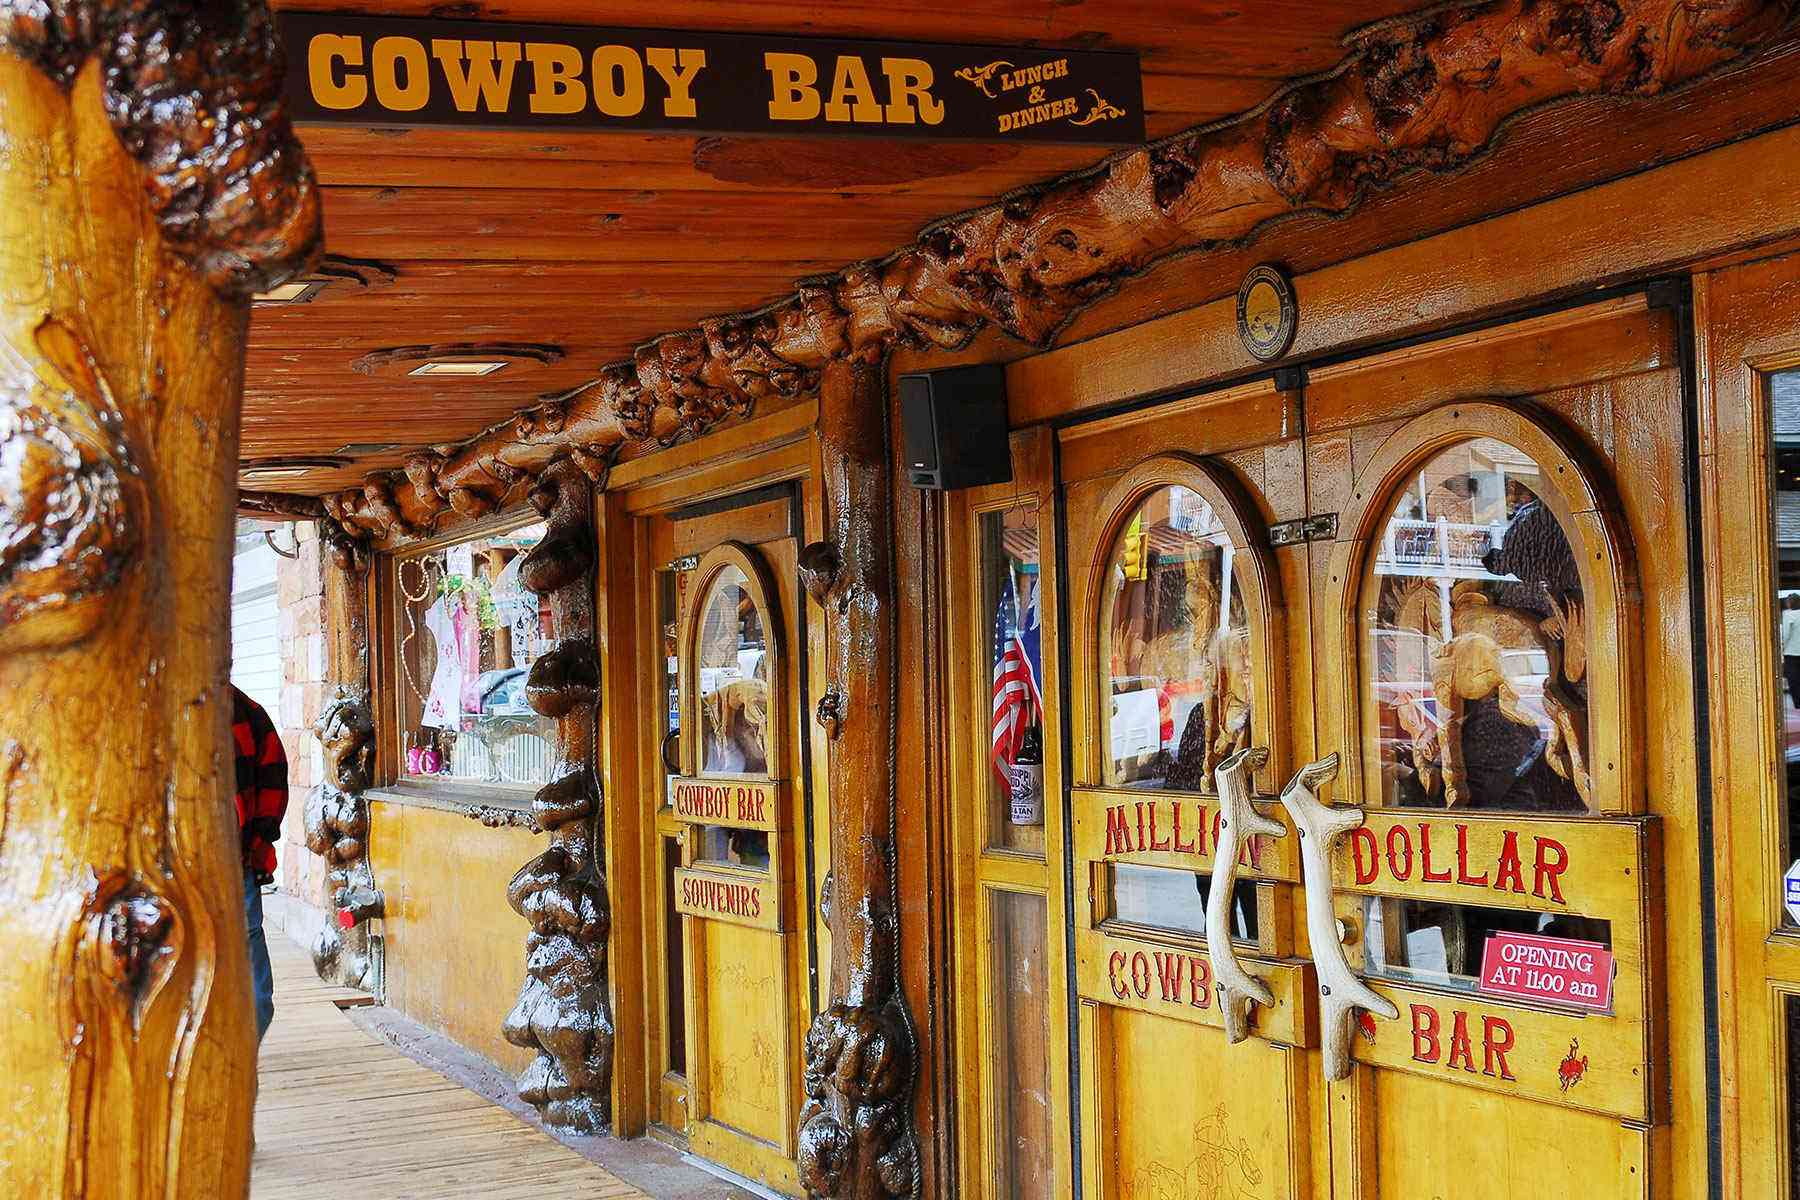 12 Wild West Bars to Make You Feel Like a Cowboy – Fodors Travel Guide